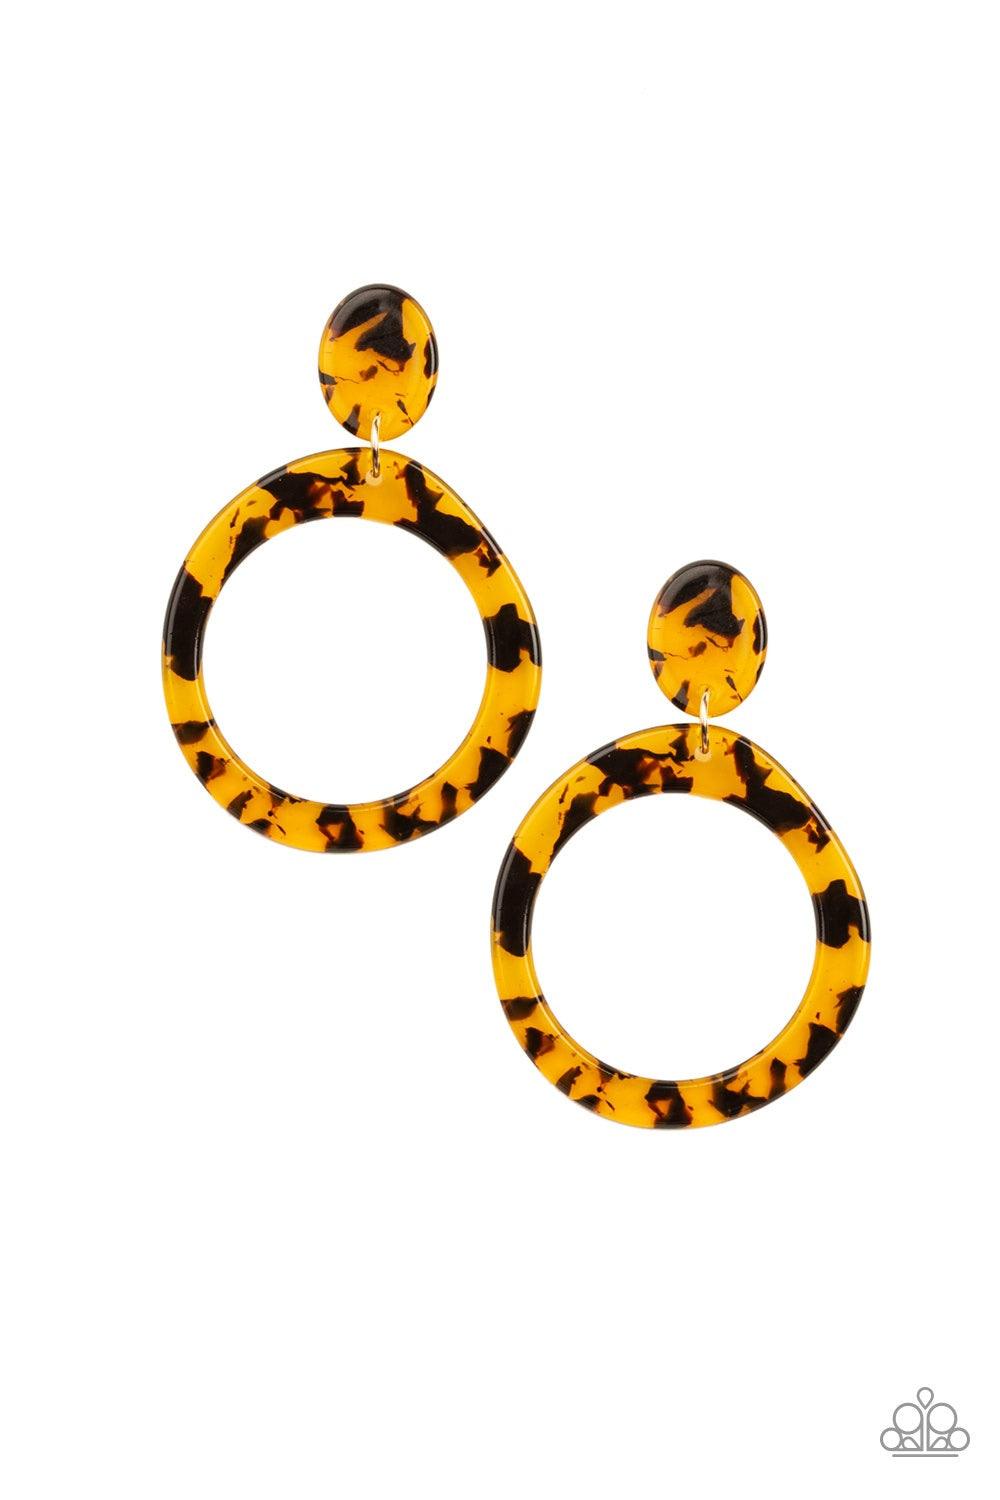 Paparazzi Accessories Fish Out Of Water - Yellow Speckled acrylic frames link into a retro lure for a flirtatious look. Earring attaches to a standard post fitting. Jewelry